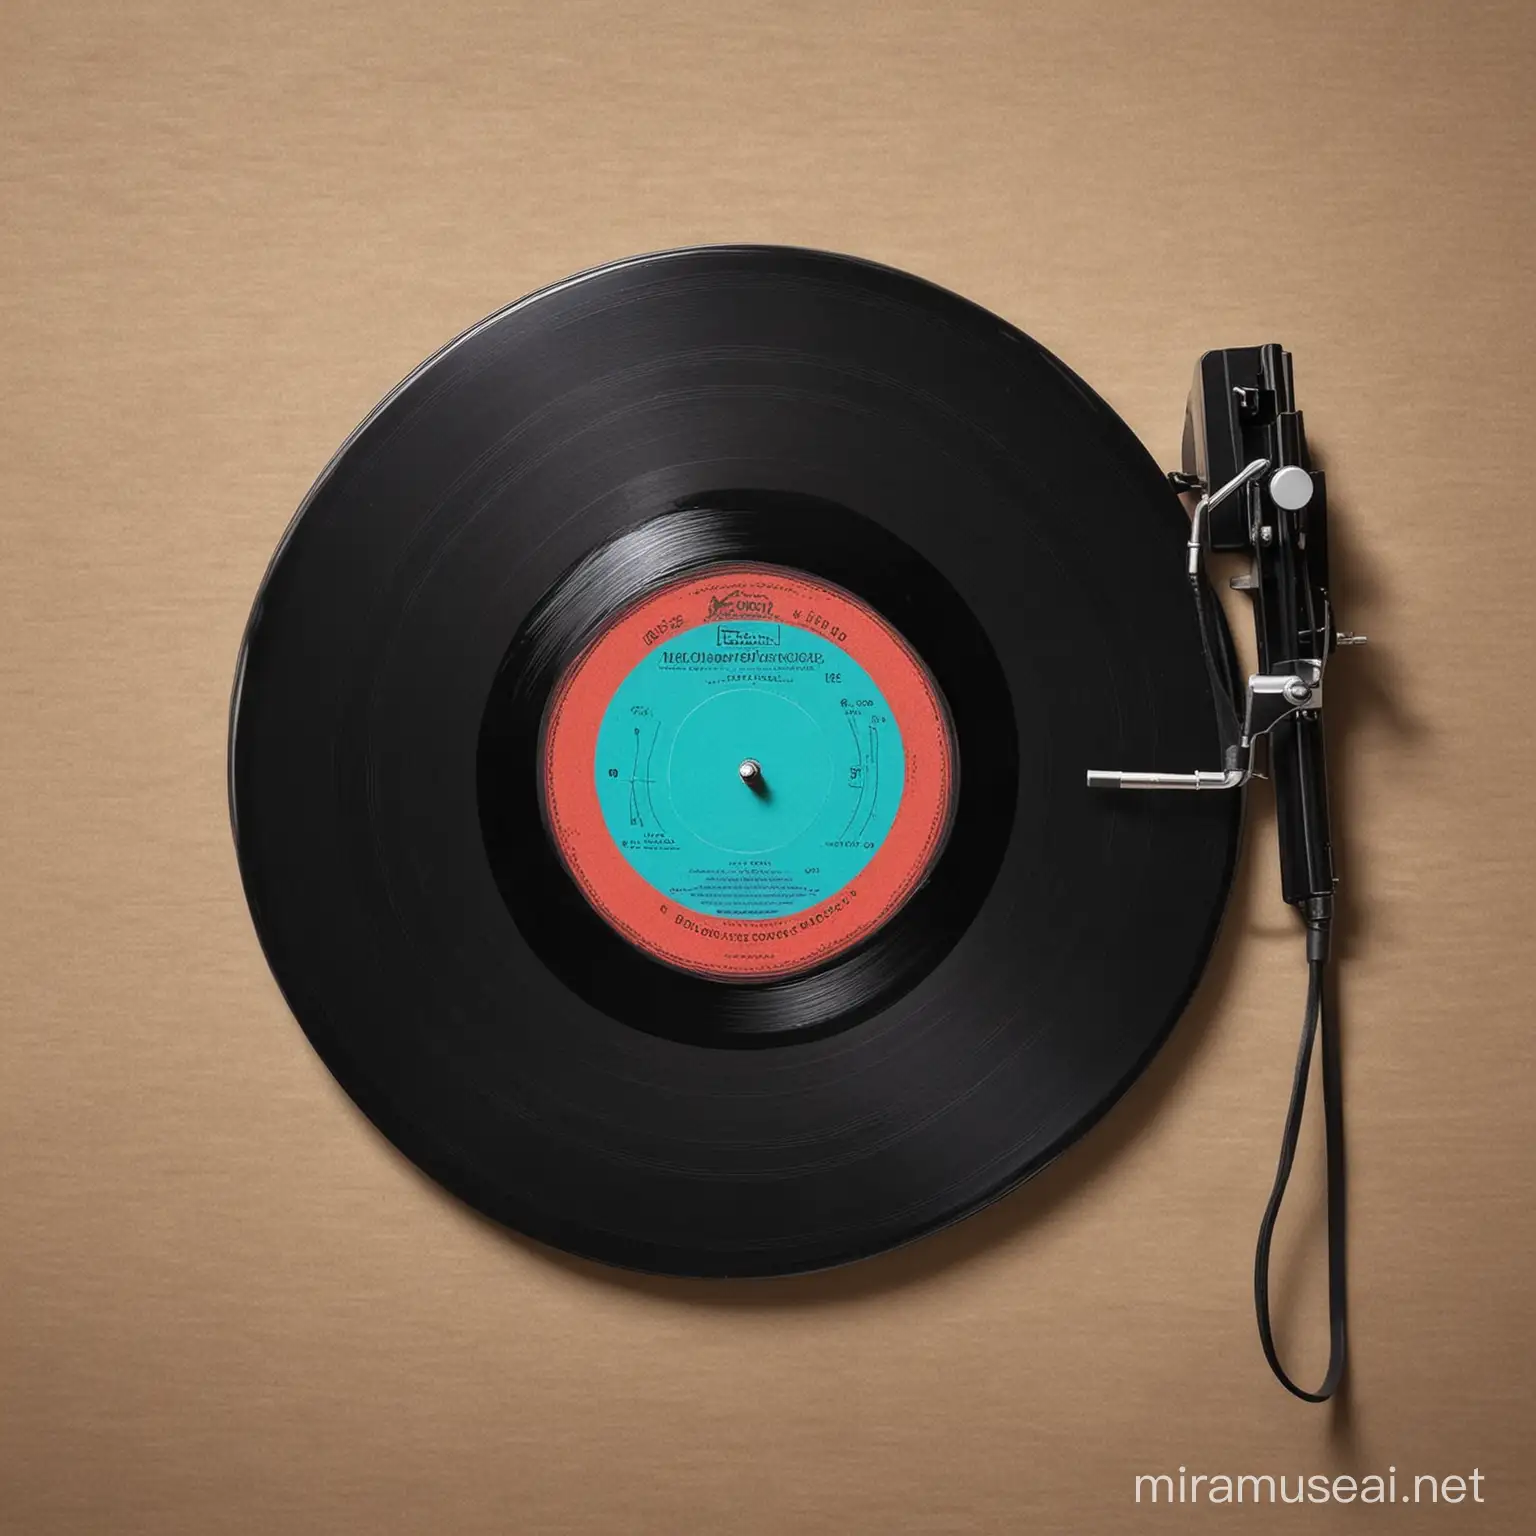 Vintage Vinyl Record Collection with Turntable and Headphones